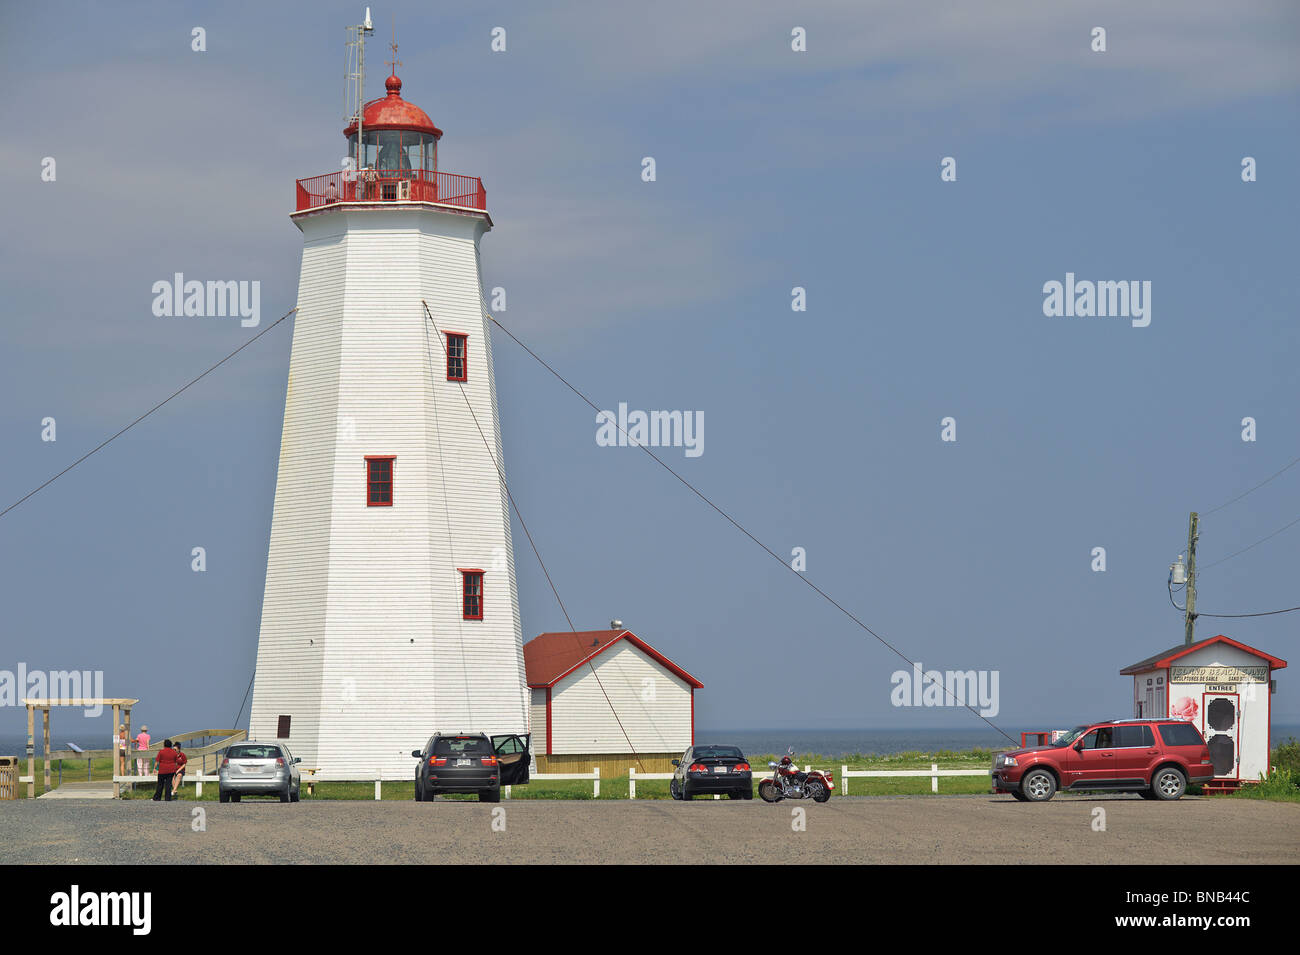 Miscou Lighthouse on Miscou Island New Brunswick Canada in summer Stock Photo